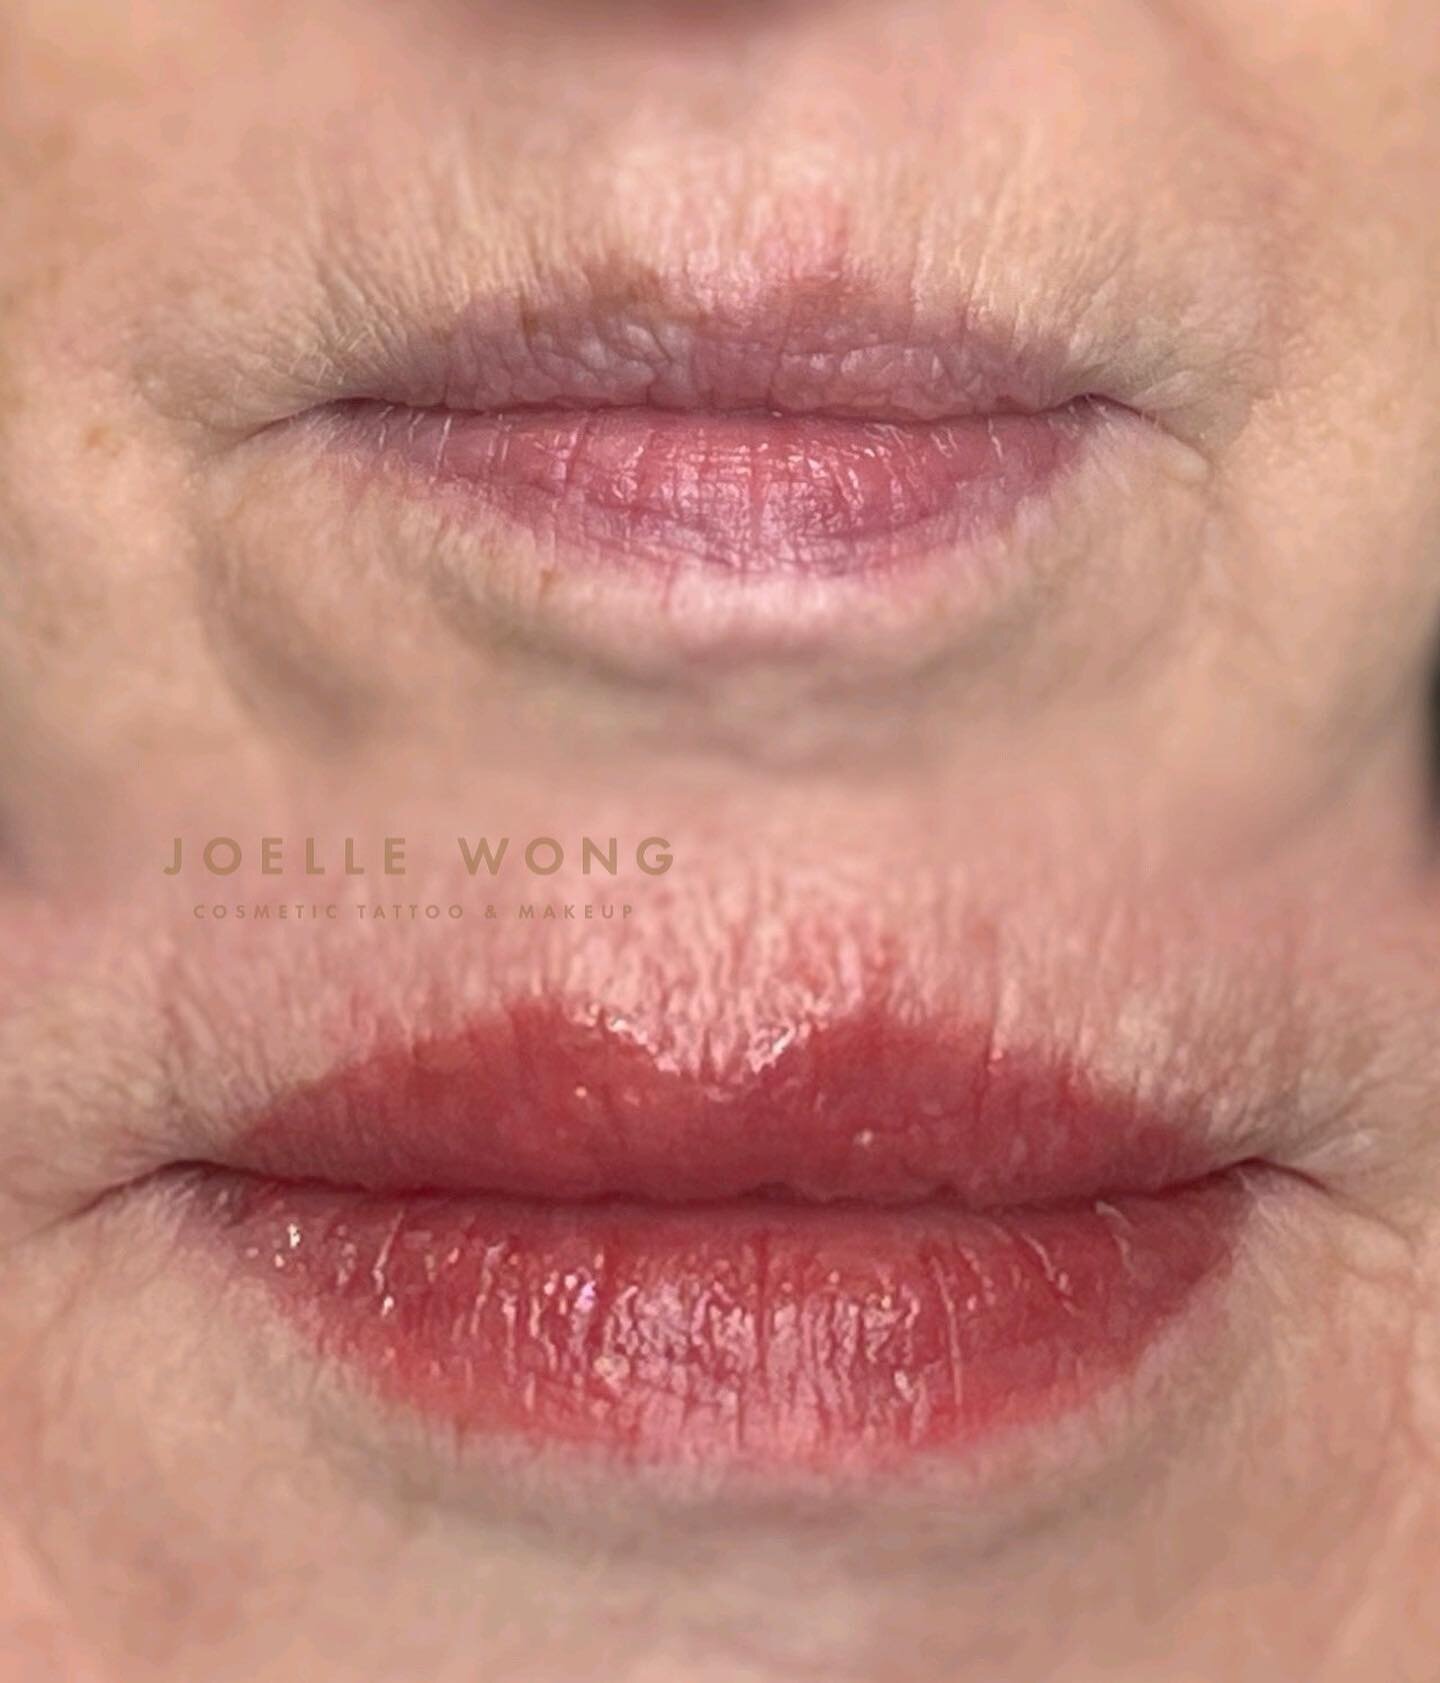 L I P  B L U S H
Over time, our lip definition starts to disappear and our lips decrease in volume.  It's like a double whammy.

Lip blush can help restore your lip definition and overall balance, helping your lips appear fuller, no matter what age.
